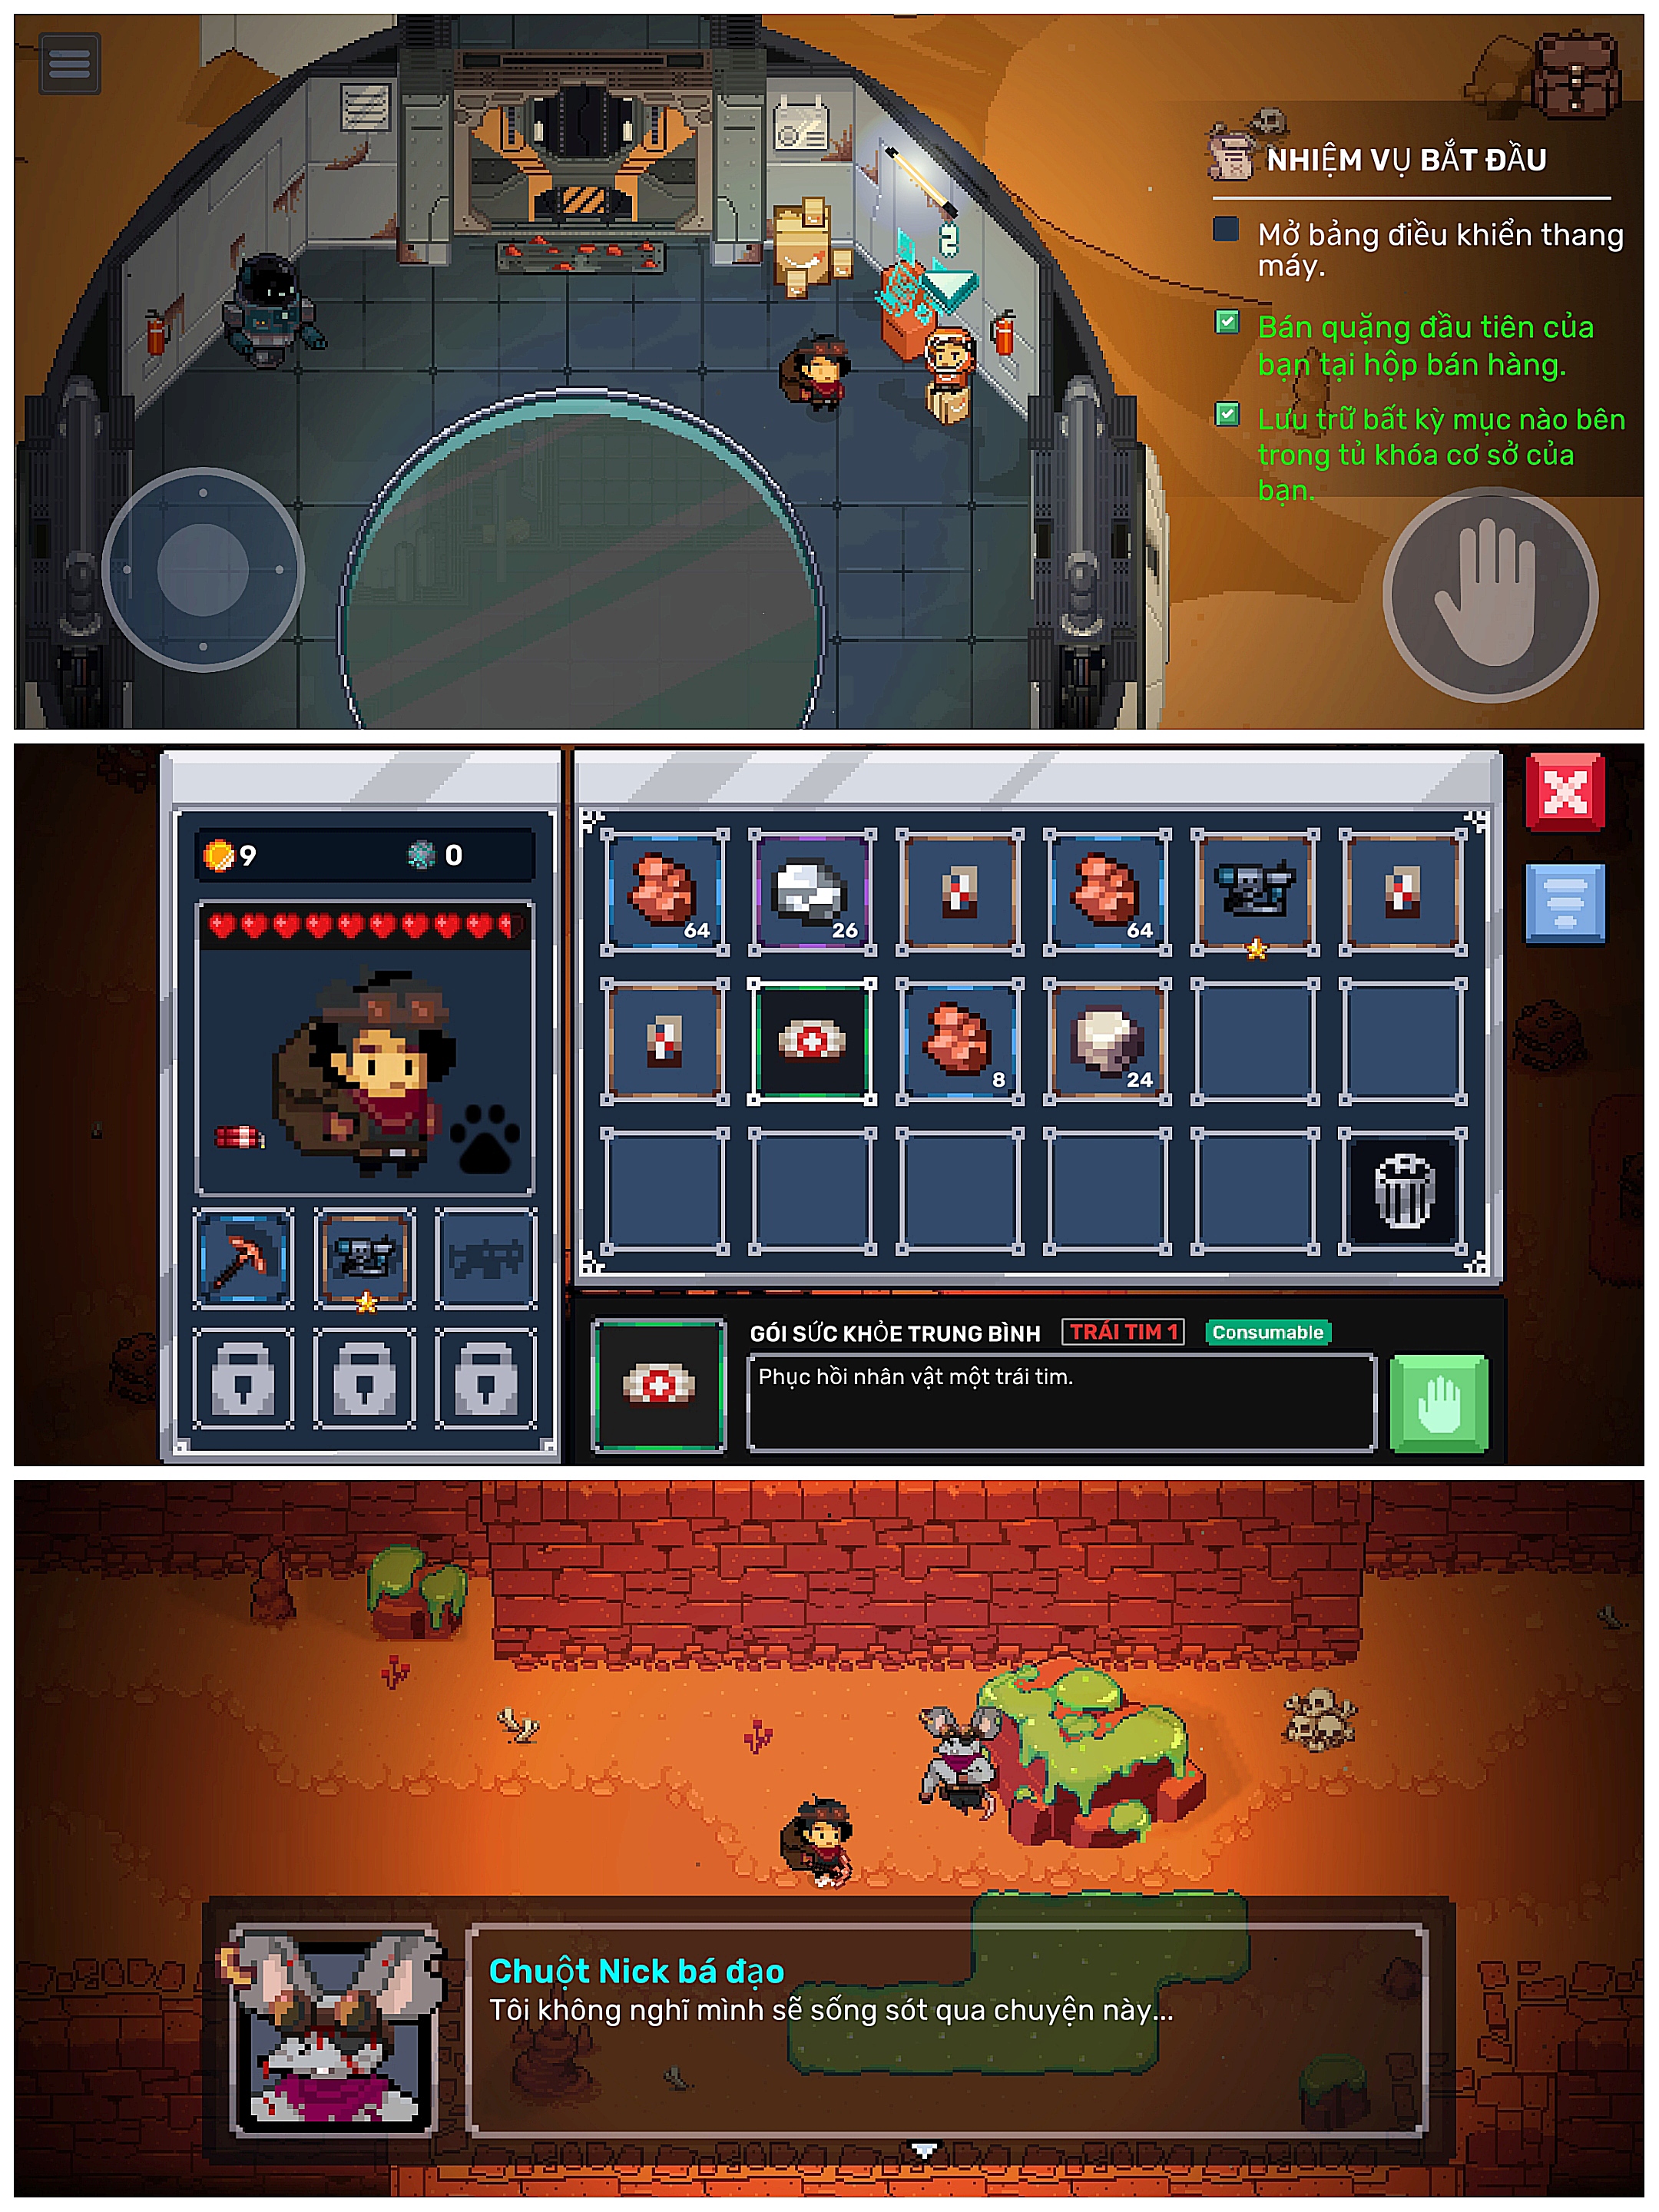 [Game Android] MineGeon: Space Mining Dungeon Tiếng Việt